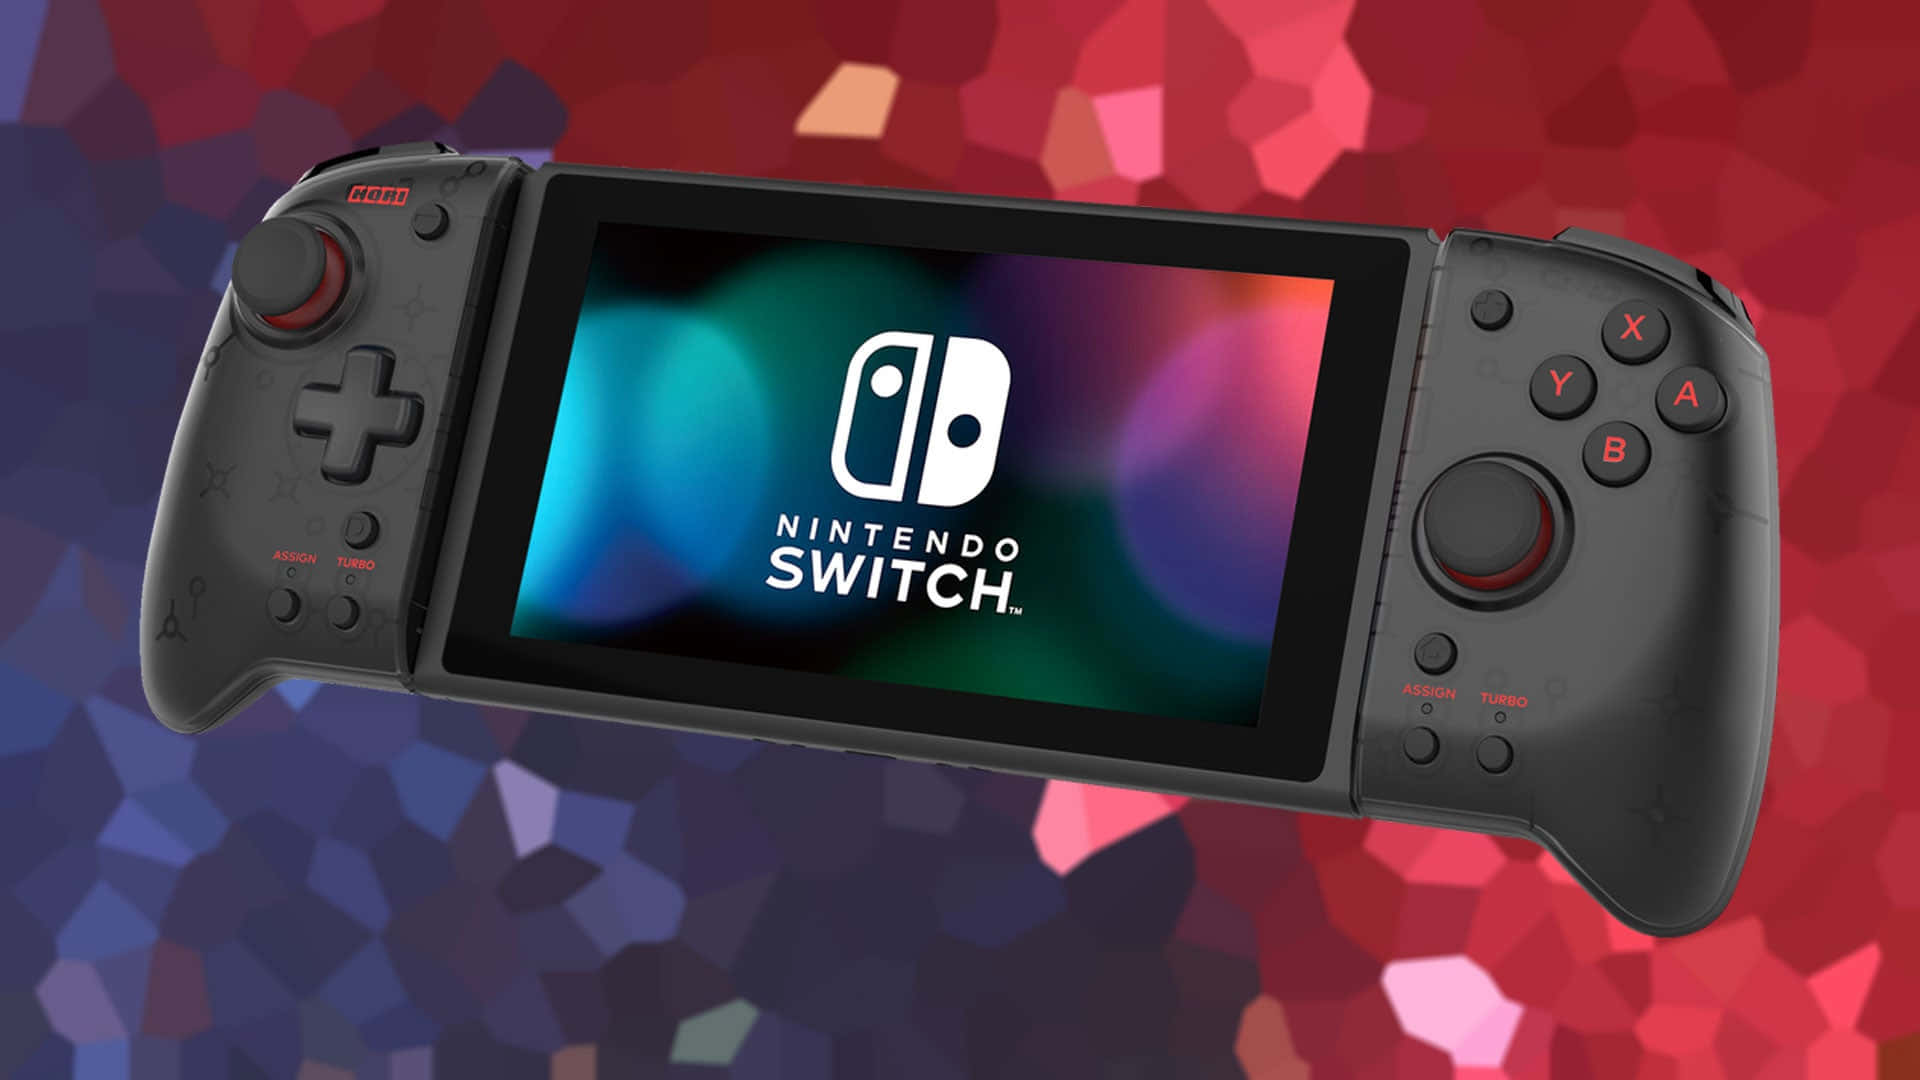 Play Station&Switch – Bring the Joy of Gaming Everywhere